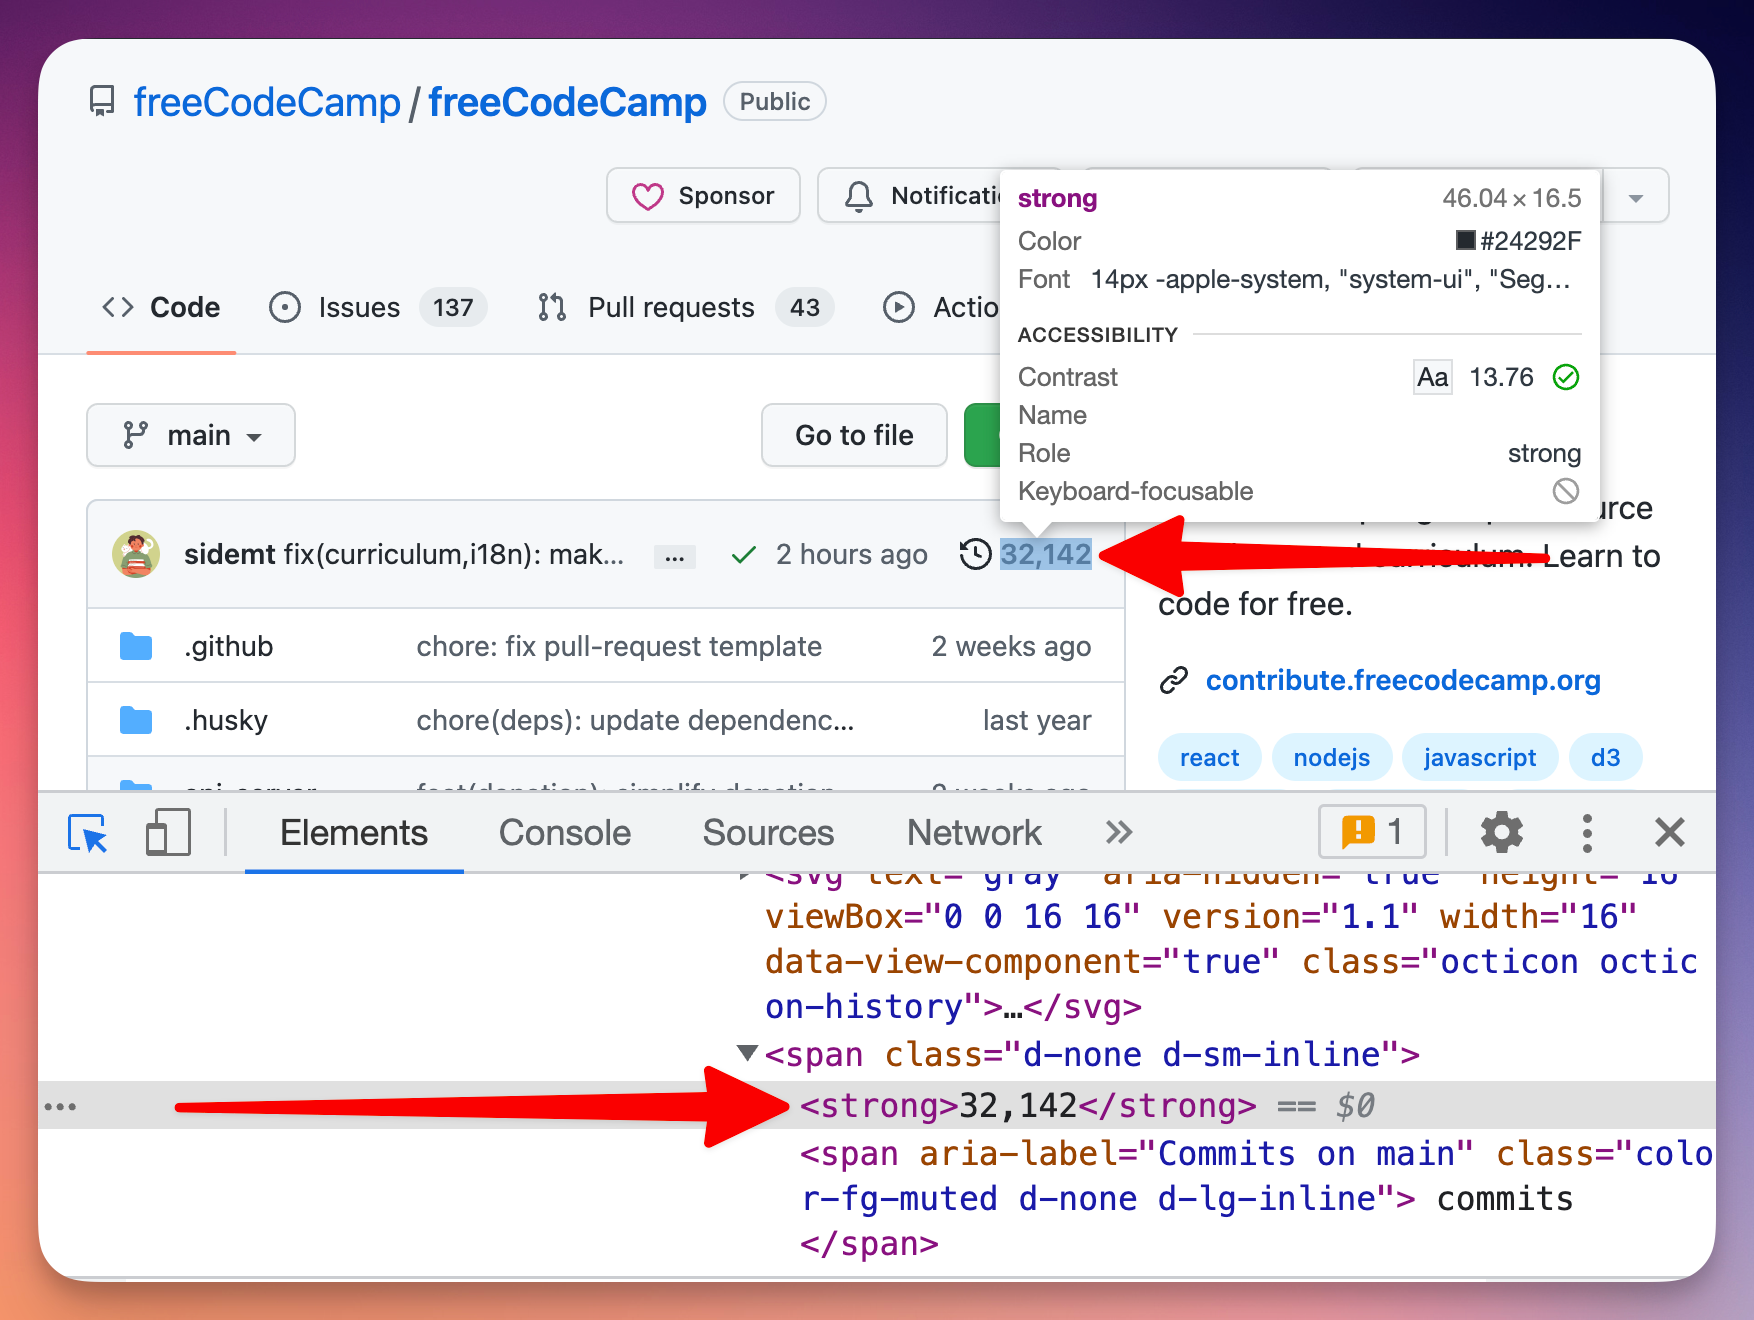 Extracting commit counts from DevTools